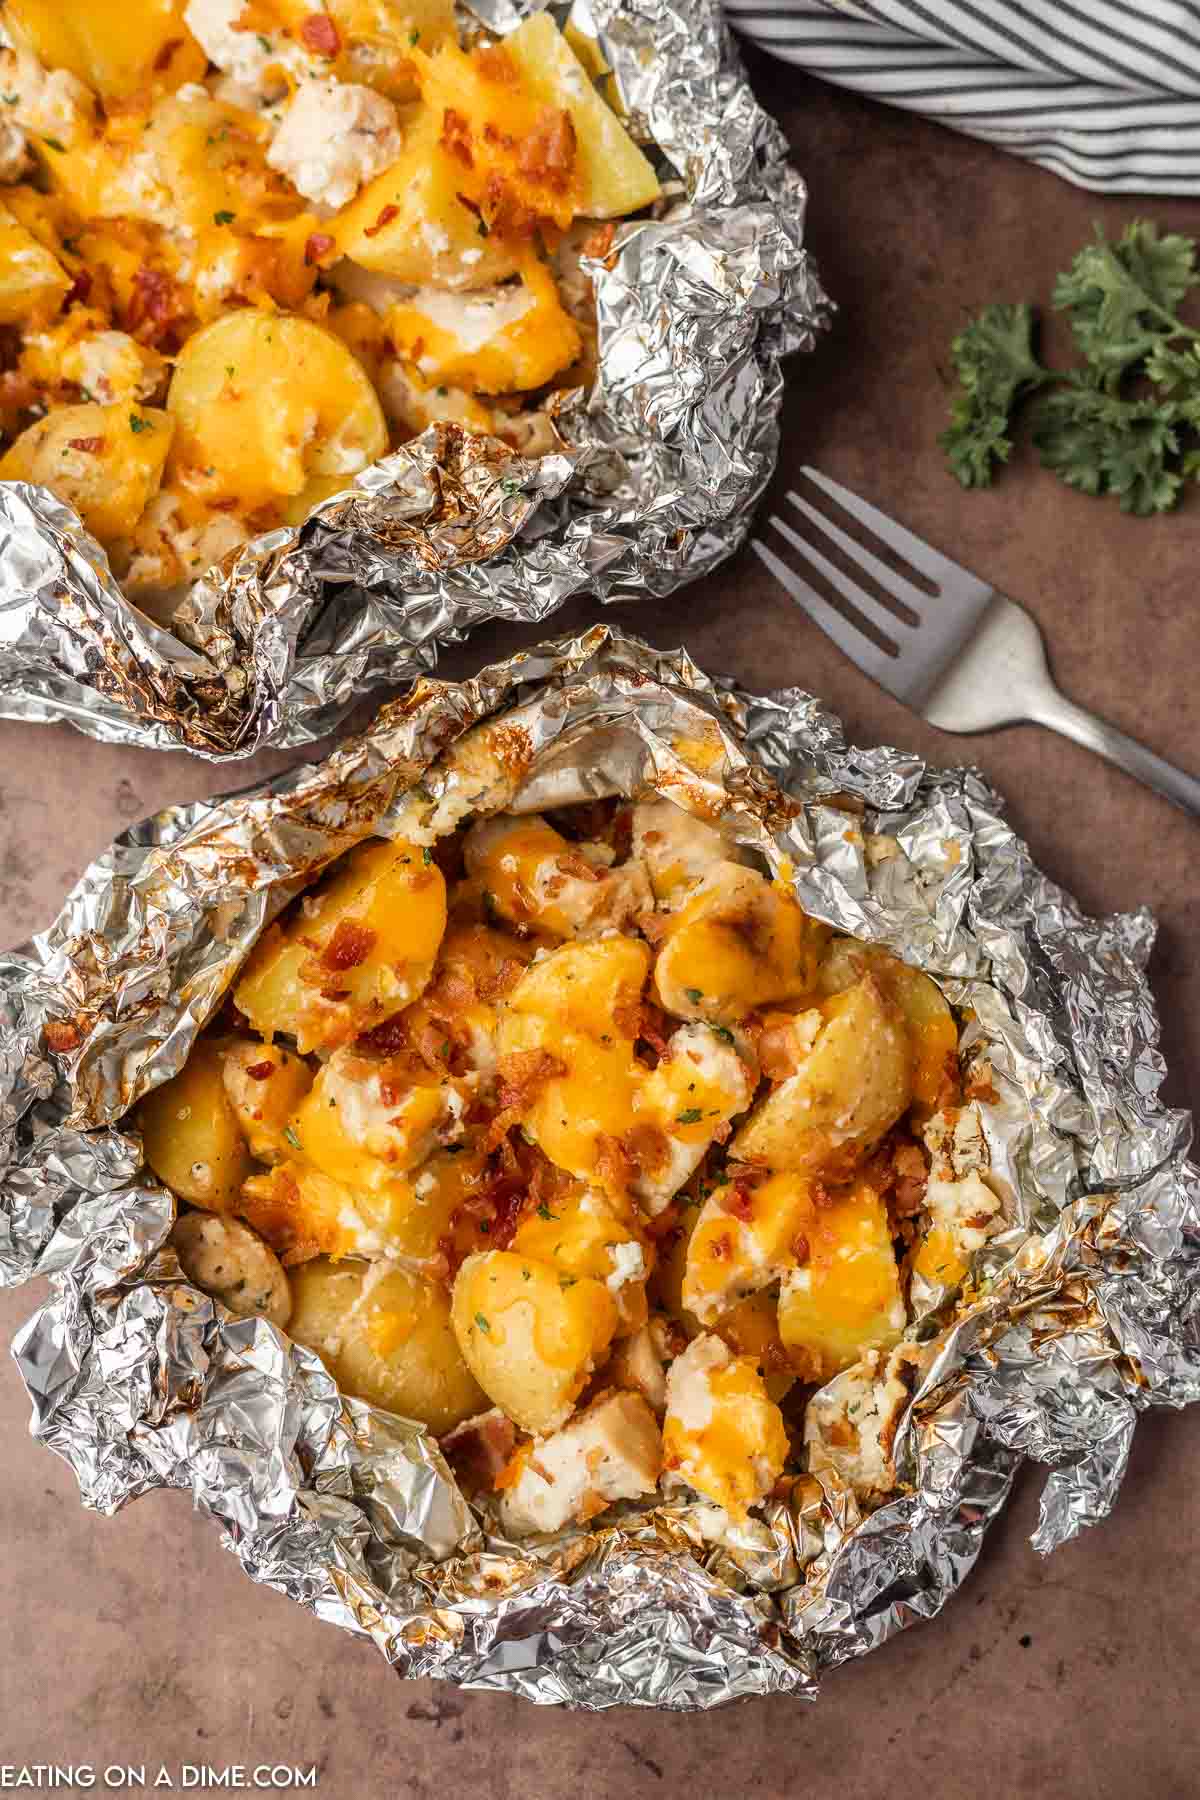 5-Ingredient Foil Packet Chicken Recipes (Baked or Grilled)